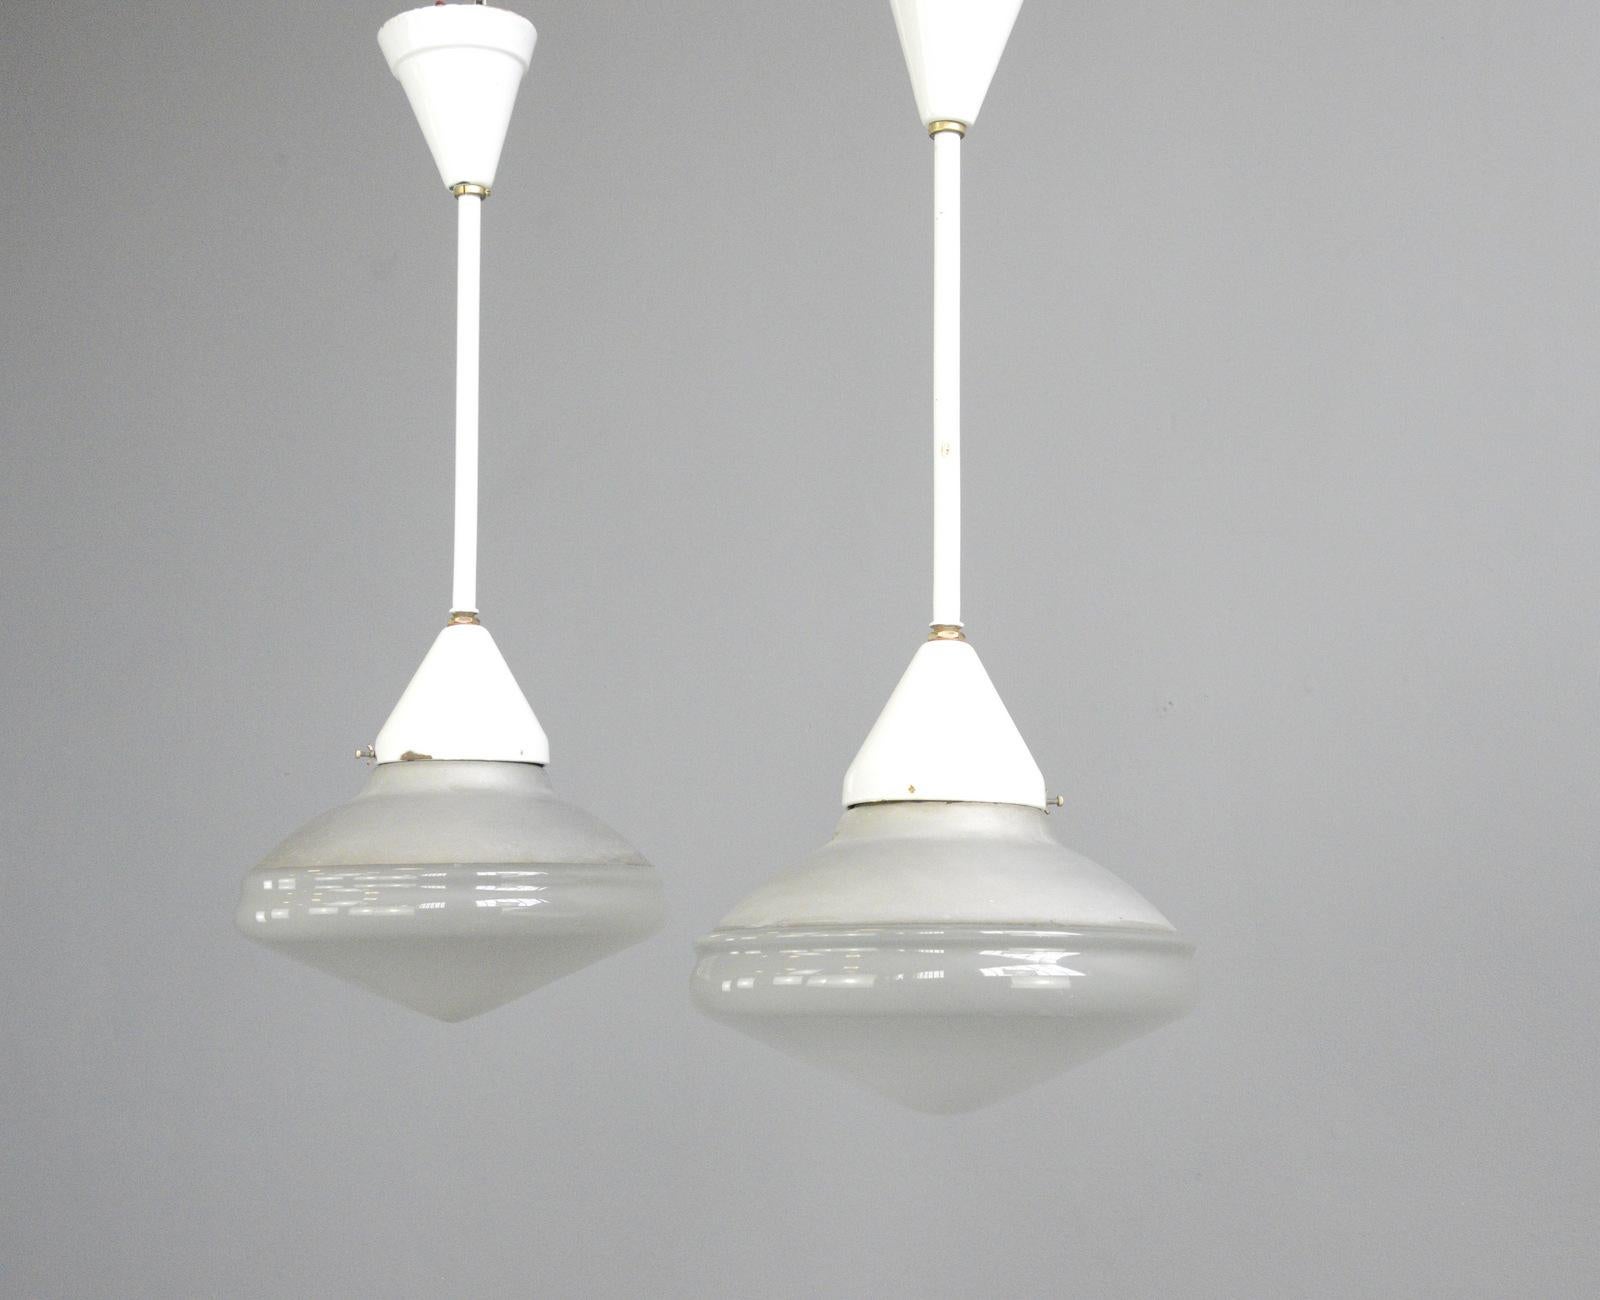 Mercury glass and enamel pendant lights by Phillips, circa 1920s

- Price is per light (2 available)
- Mercury glass top and acid etched bottom
- Original vitreous white enamel stems
- Takes E27 fitting bulbs
- Originally from a butchers shop